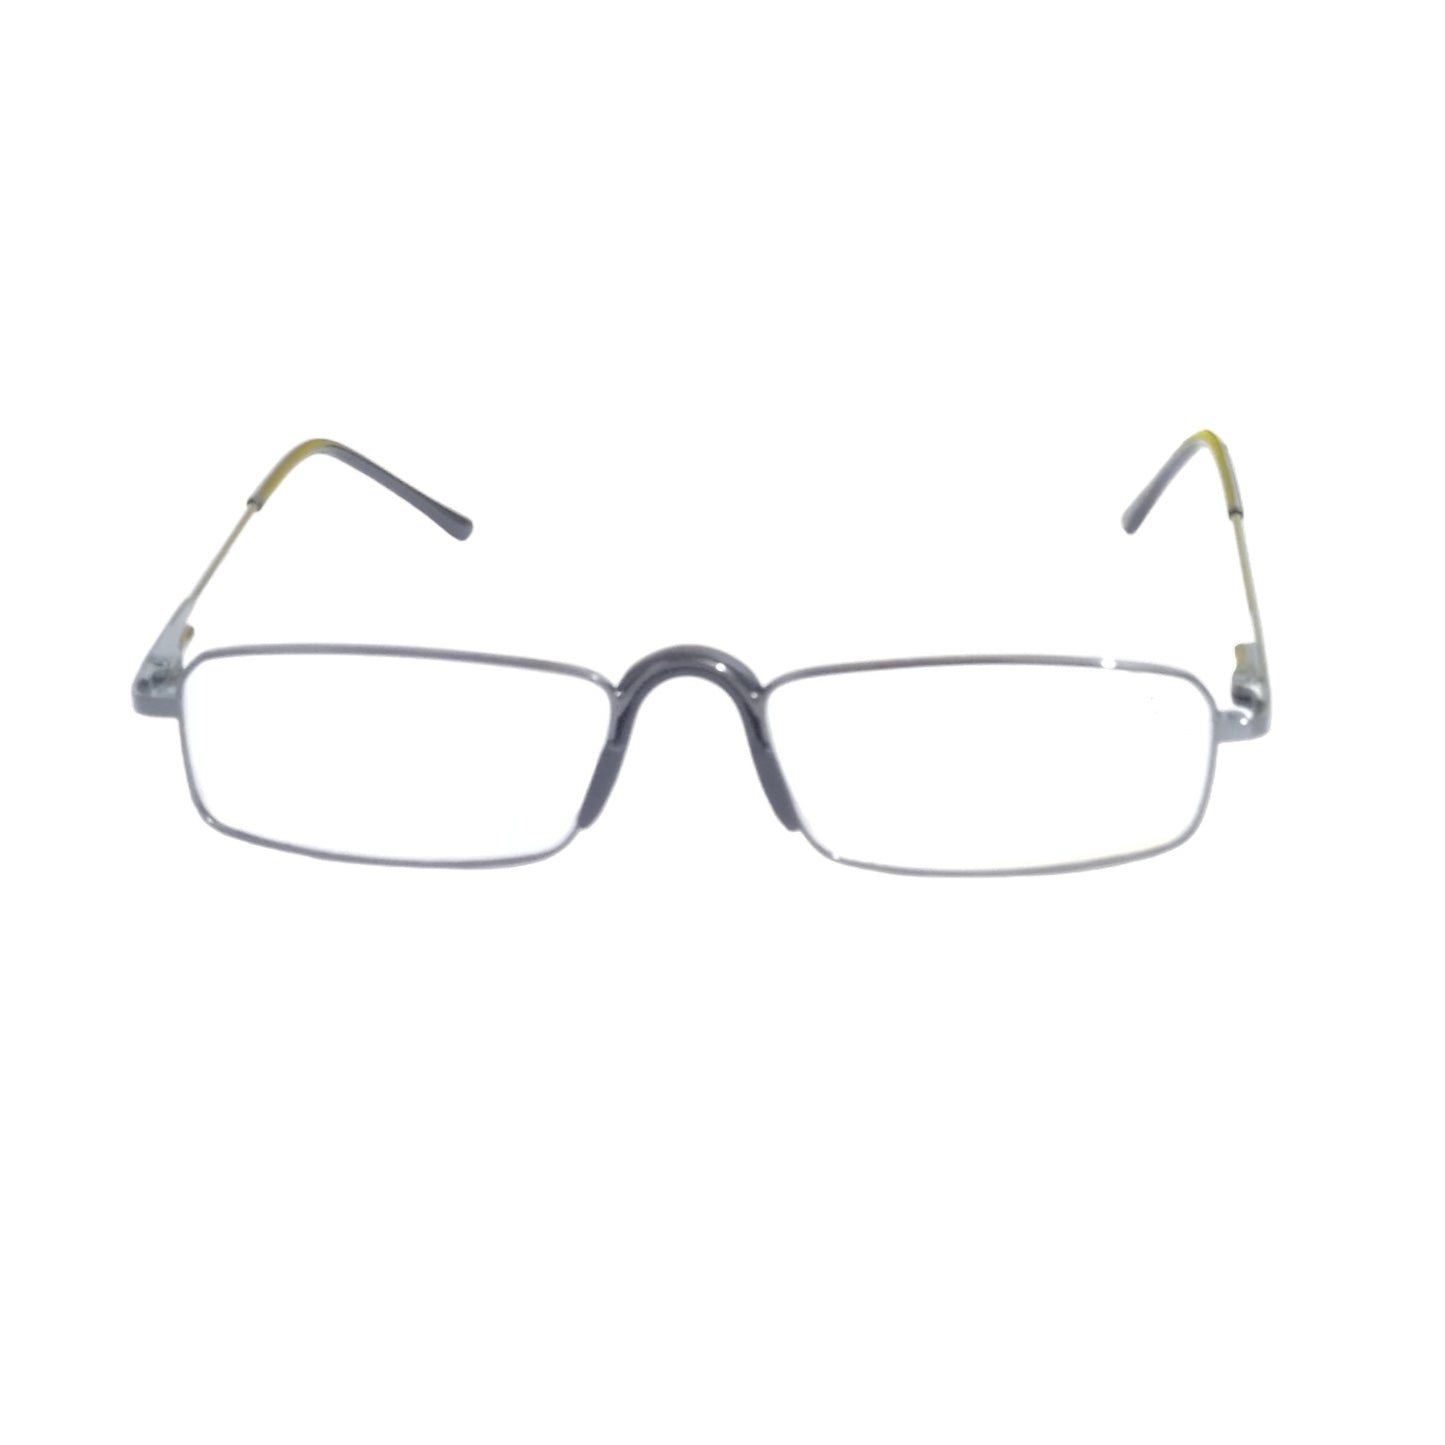 Black Full Frame Metal Computer Reading Glasses with Fix Nose Pads